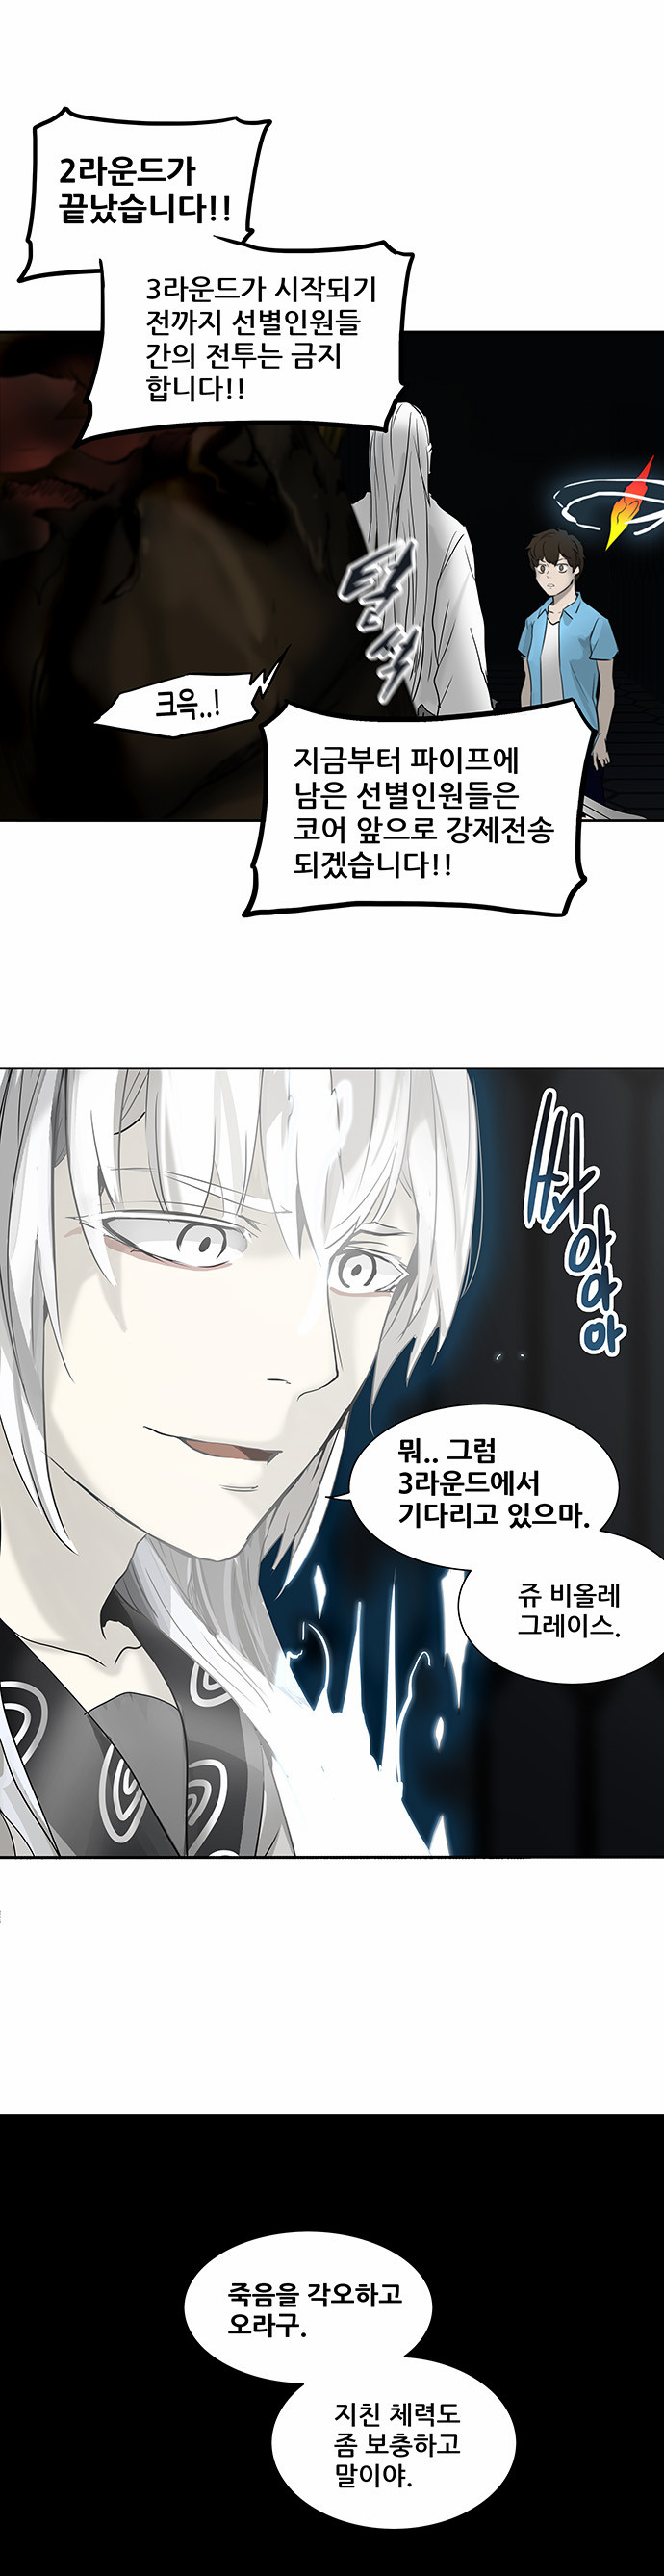 Tower of God - Chapter 269 - Page 1